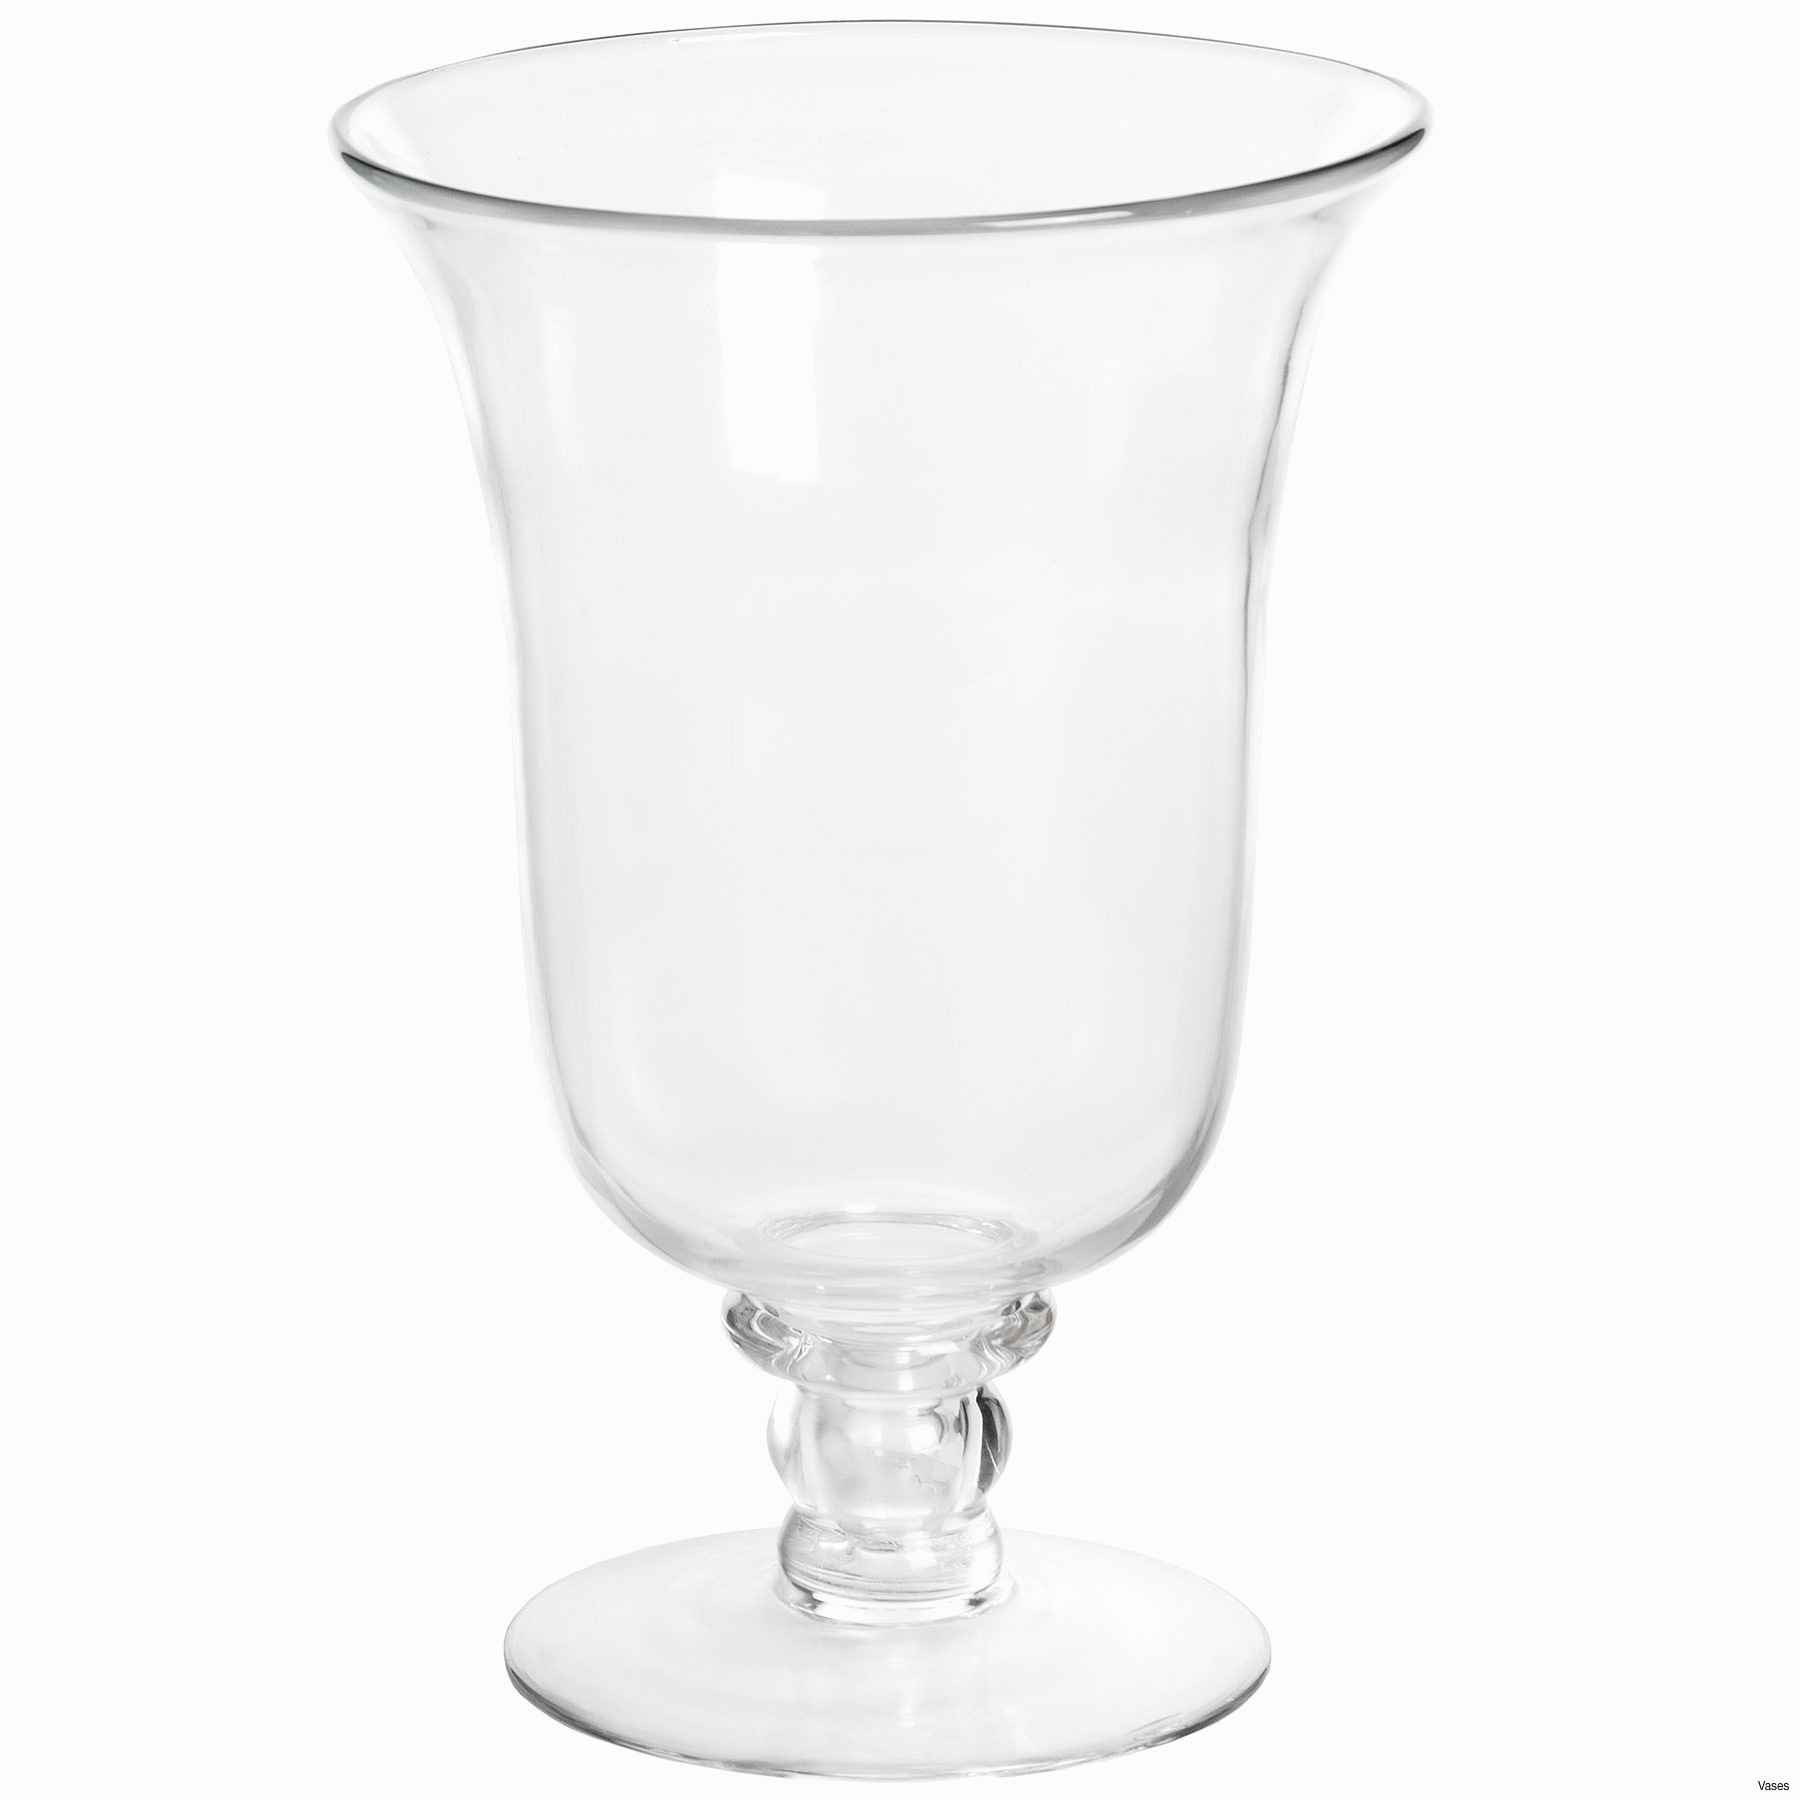 22 Recommended Glass Vase with Iron Stand 2024 free download glass vase with iron stand of candle stands wholesale lovely faux crystal candle holders alive with regard to candle stands wholesale lovely faux crystal candle holders alive vases gold tall